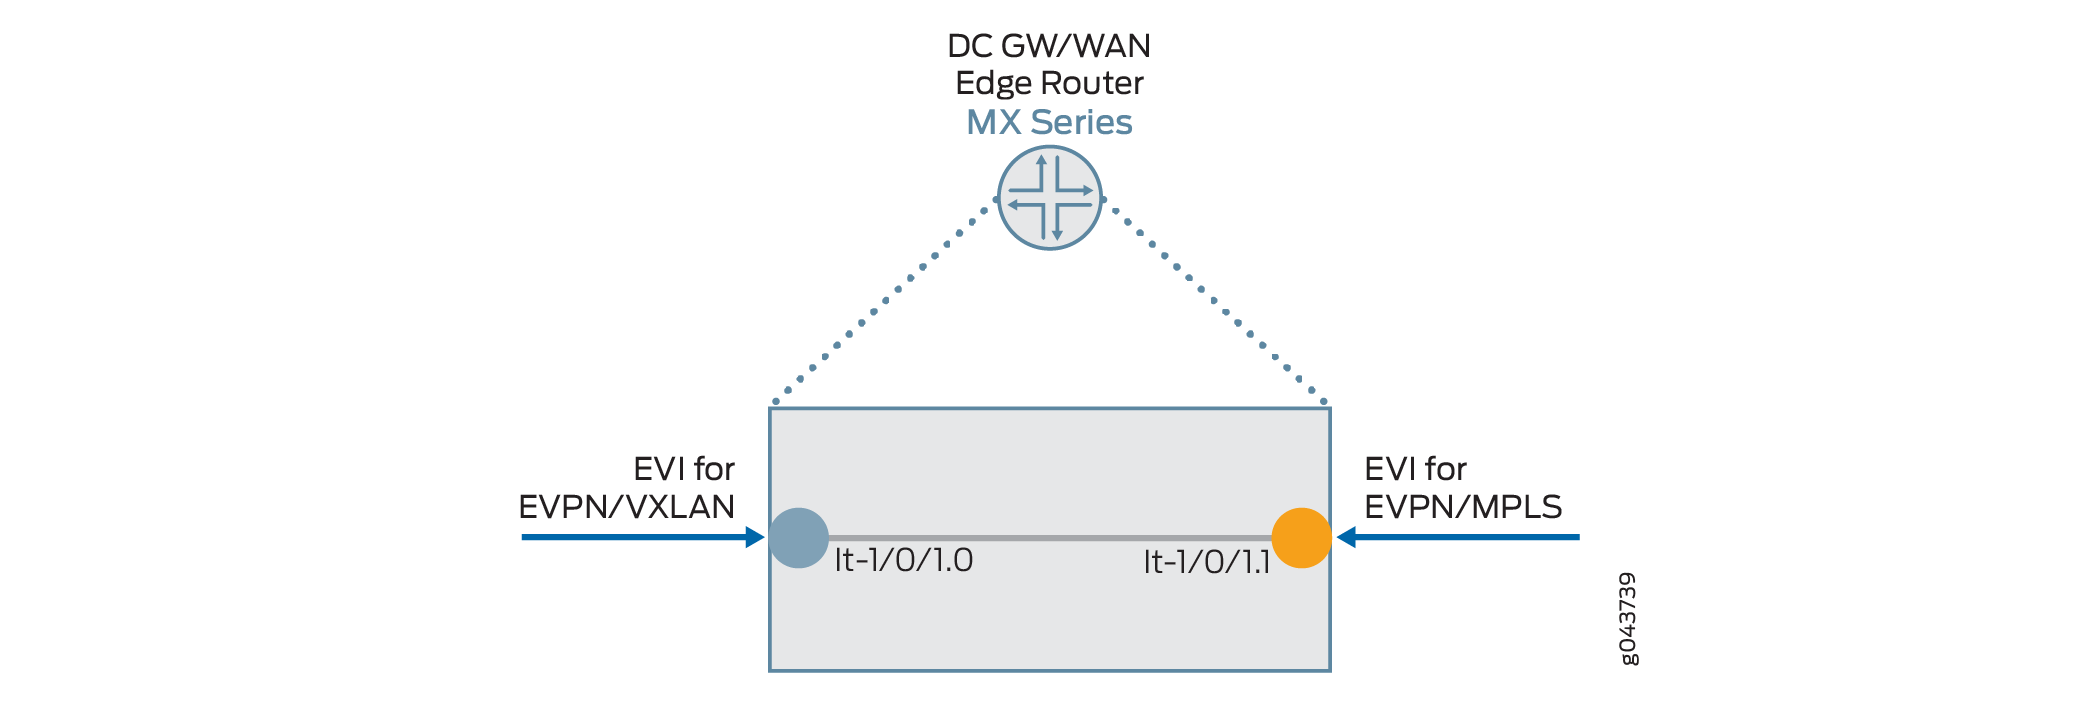 Logical Tunnel (lt-) Interface of DC GW/WAN Edge Router Configured to Interconnect EVPN-VXLAN and EVPN-MPLS Instances